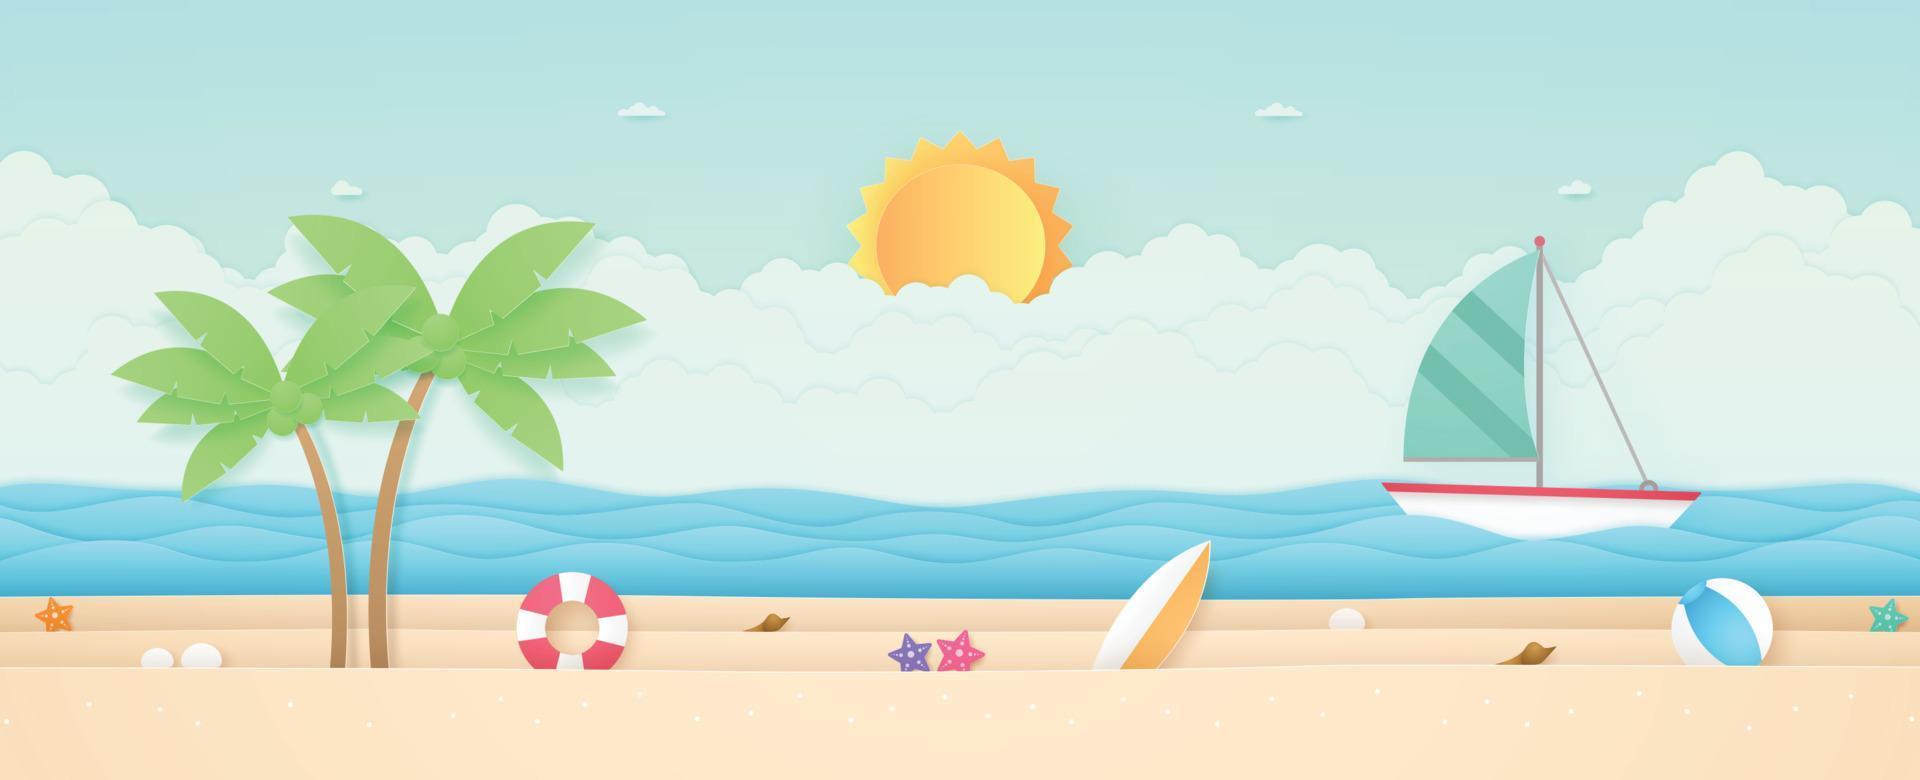 Summer Time, seascape, landscape, sailboat with sea, beach and stuff, cloud, sun, paper art style vector